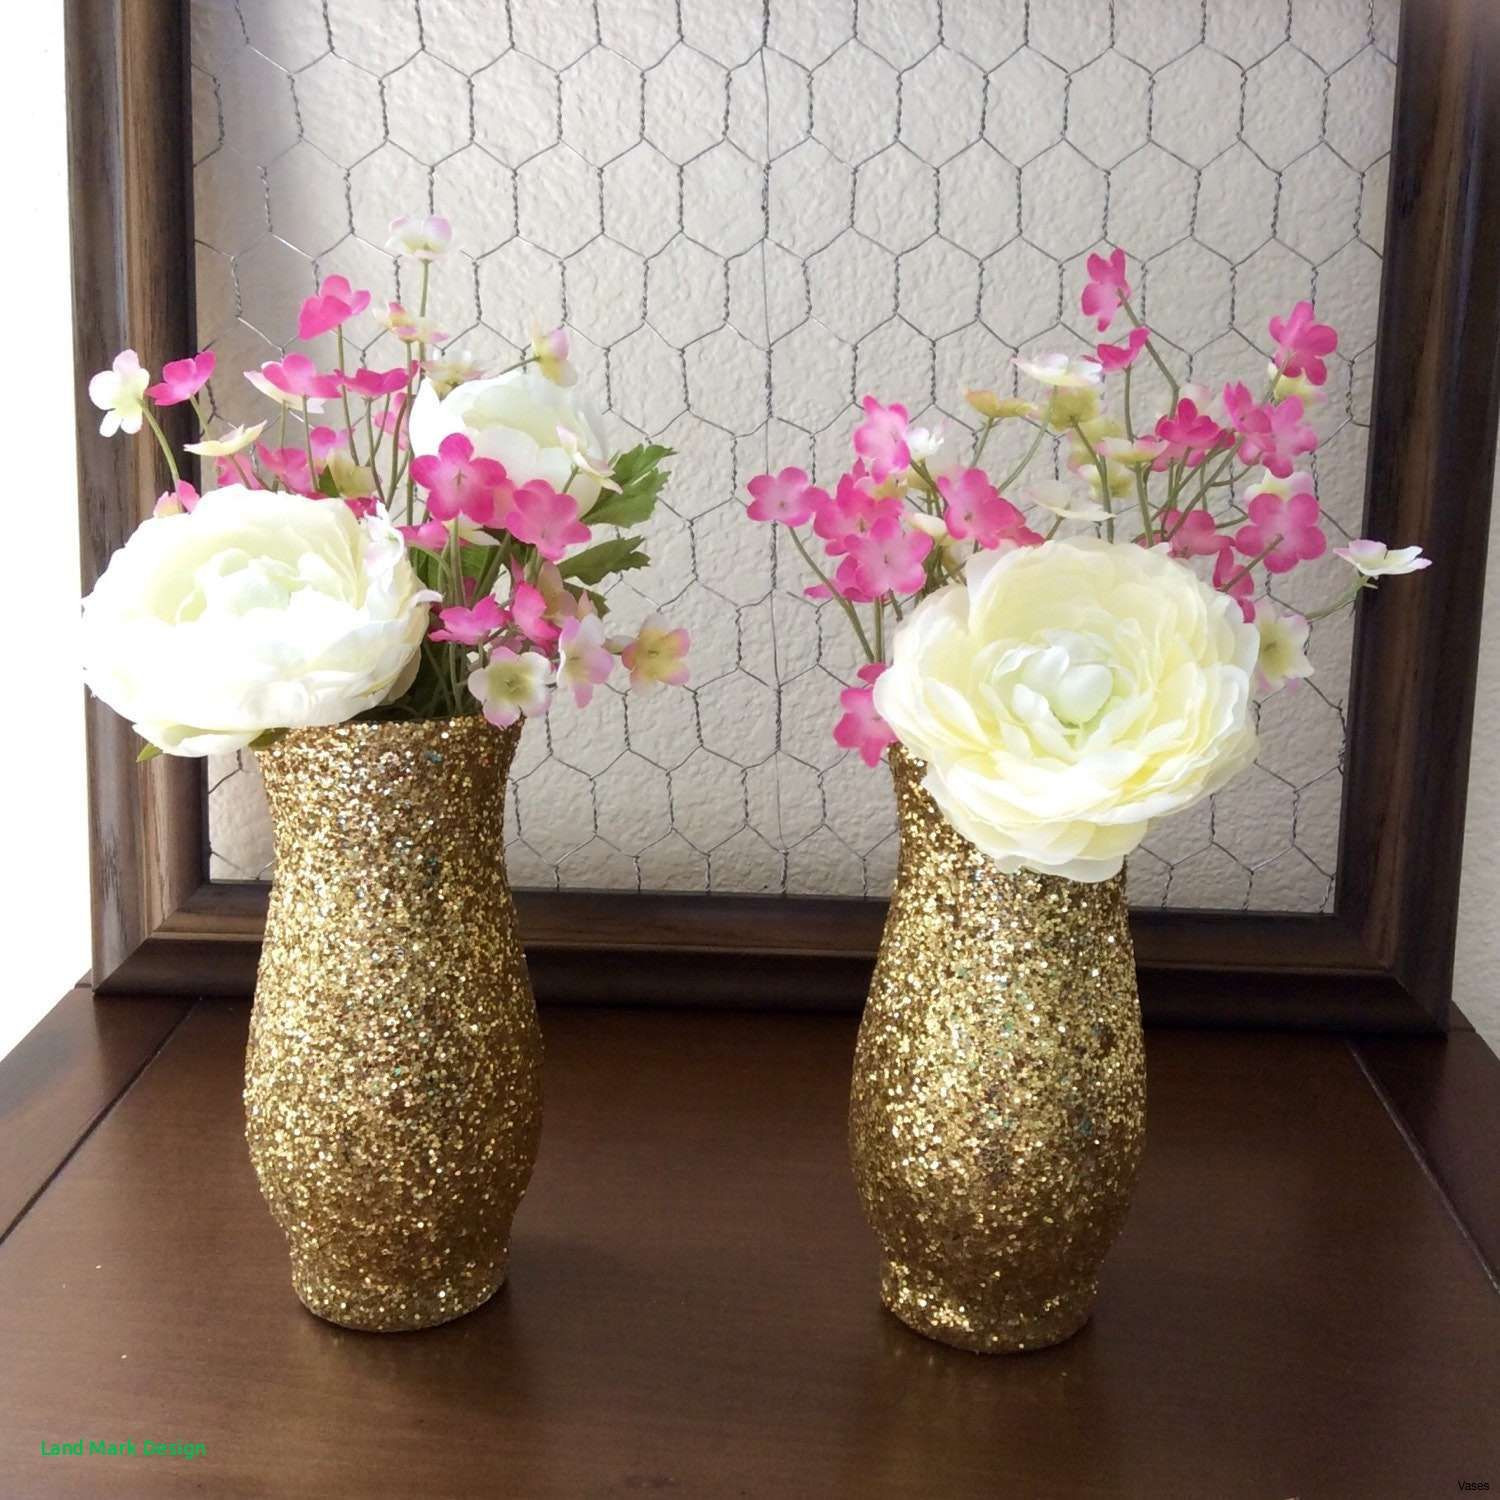 23 Perfect 10 Cylinder Vases wholesale 2024 free download 10 cylinder vases wholesale of 19 gold flower vases the weekly world intended for il fullxfull 3b2bh vases gold glitter vase set of 10 wedding by i 8d via ydeevnepropecia com